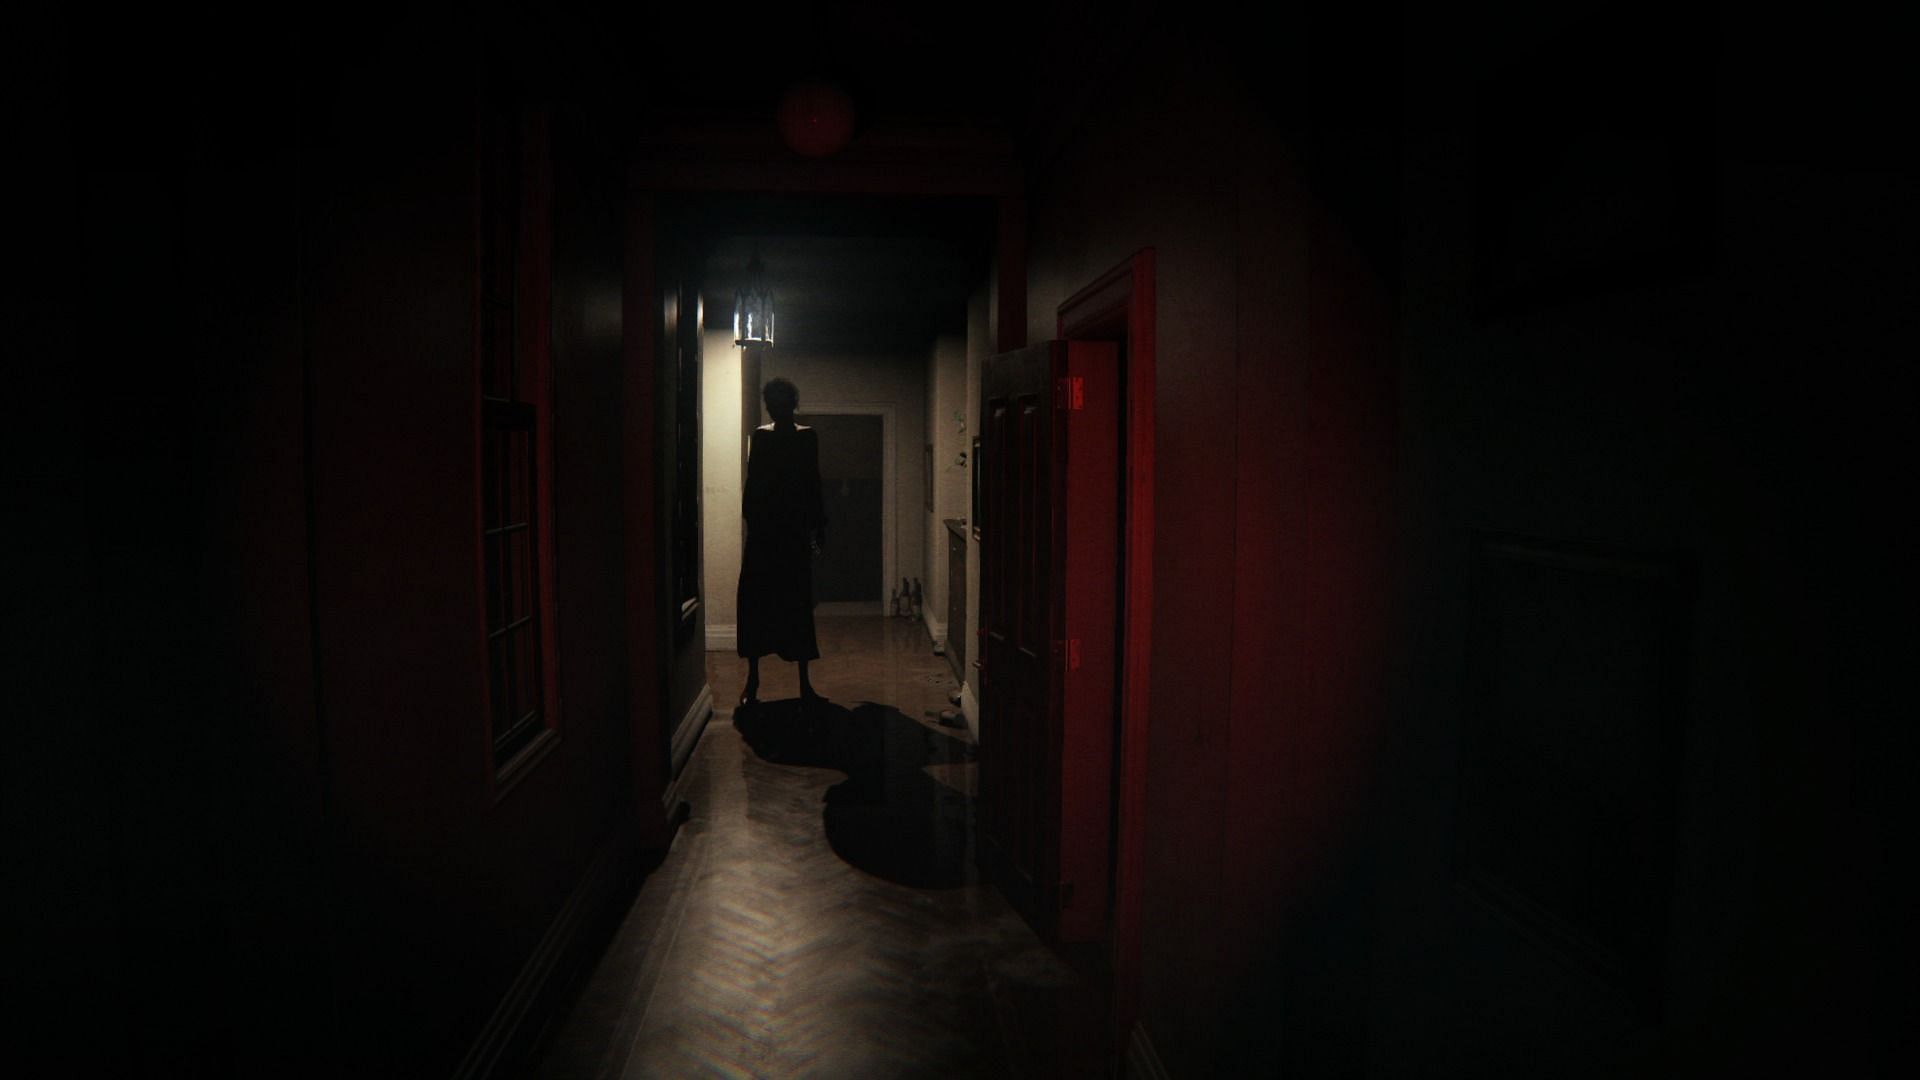 P.T. had great potential but was canceled during its development (image by Konami)